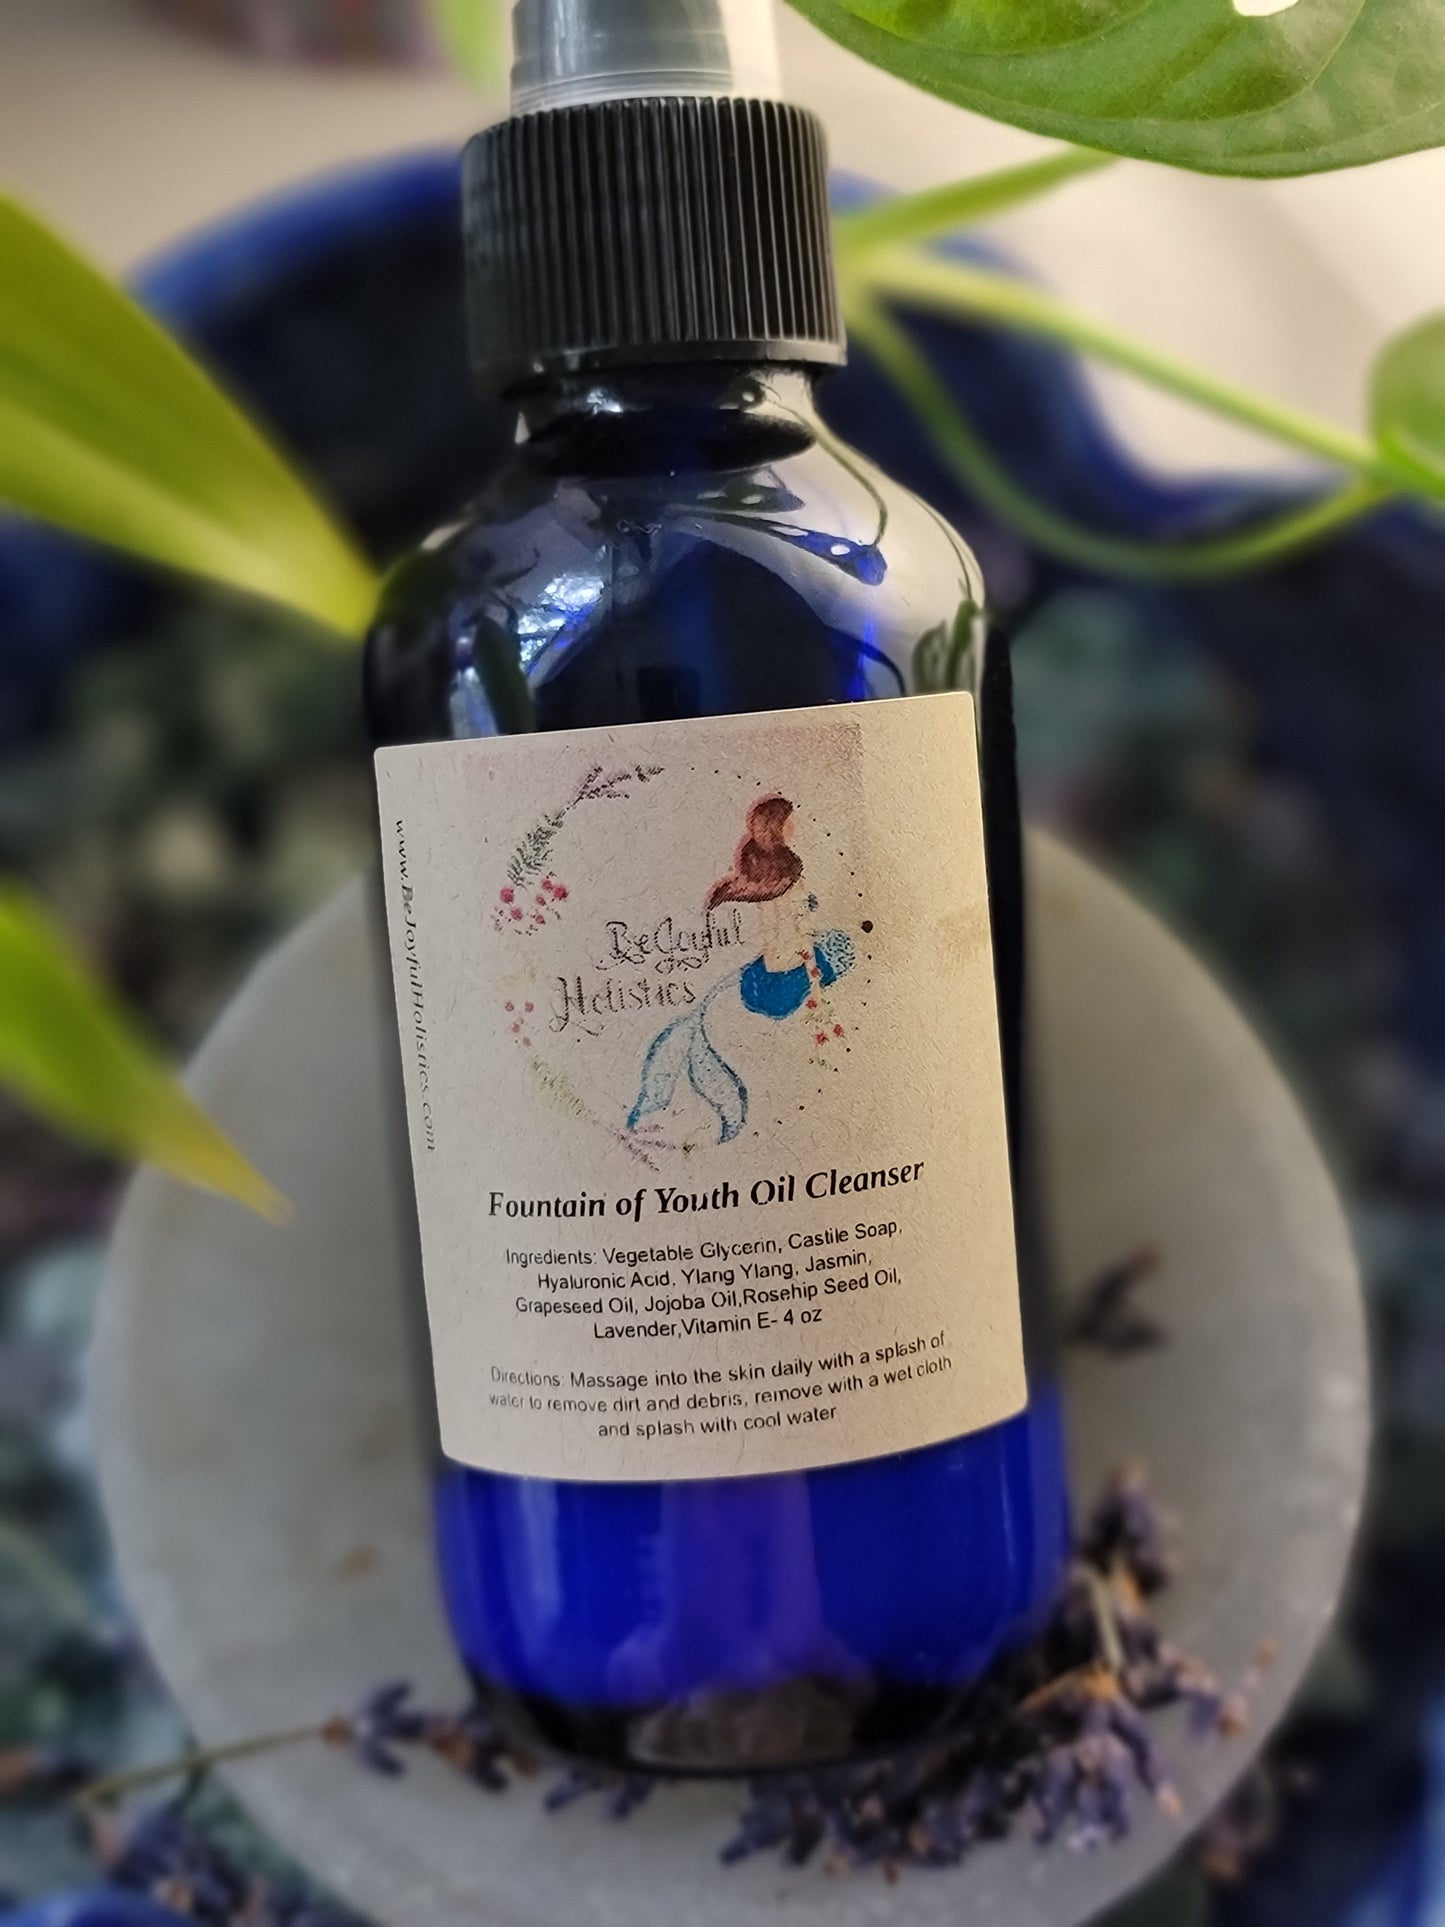 Fountain of Youth Oil Cleanser